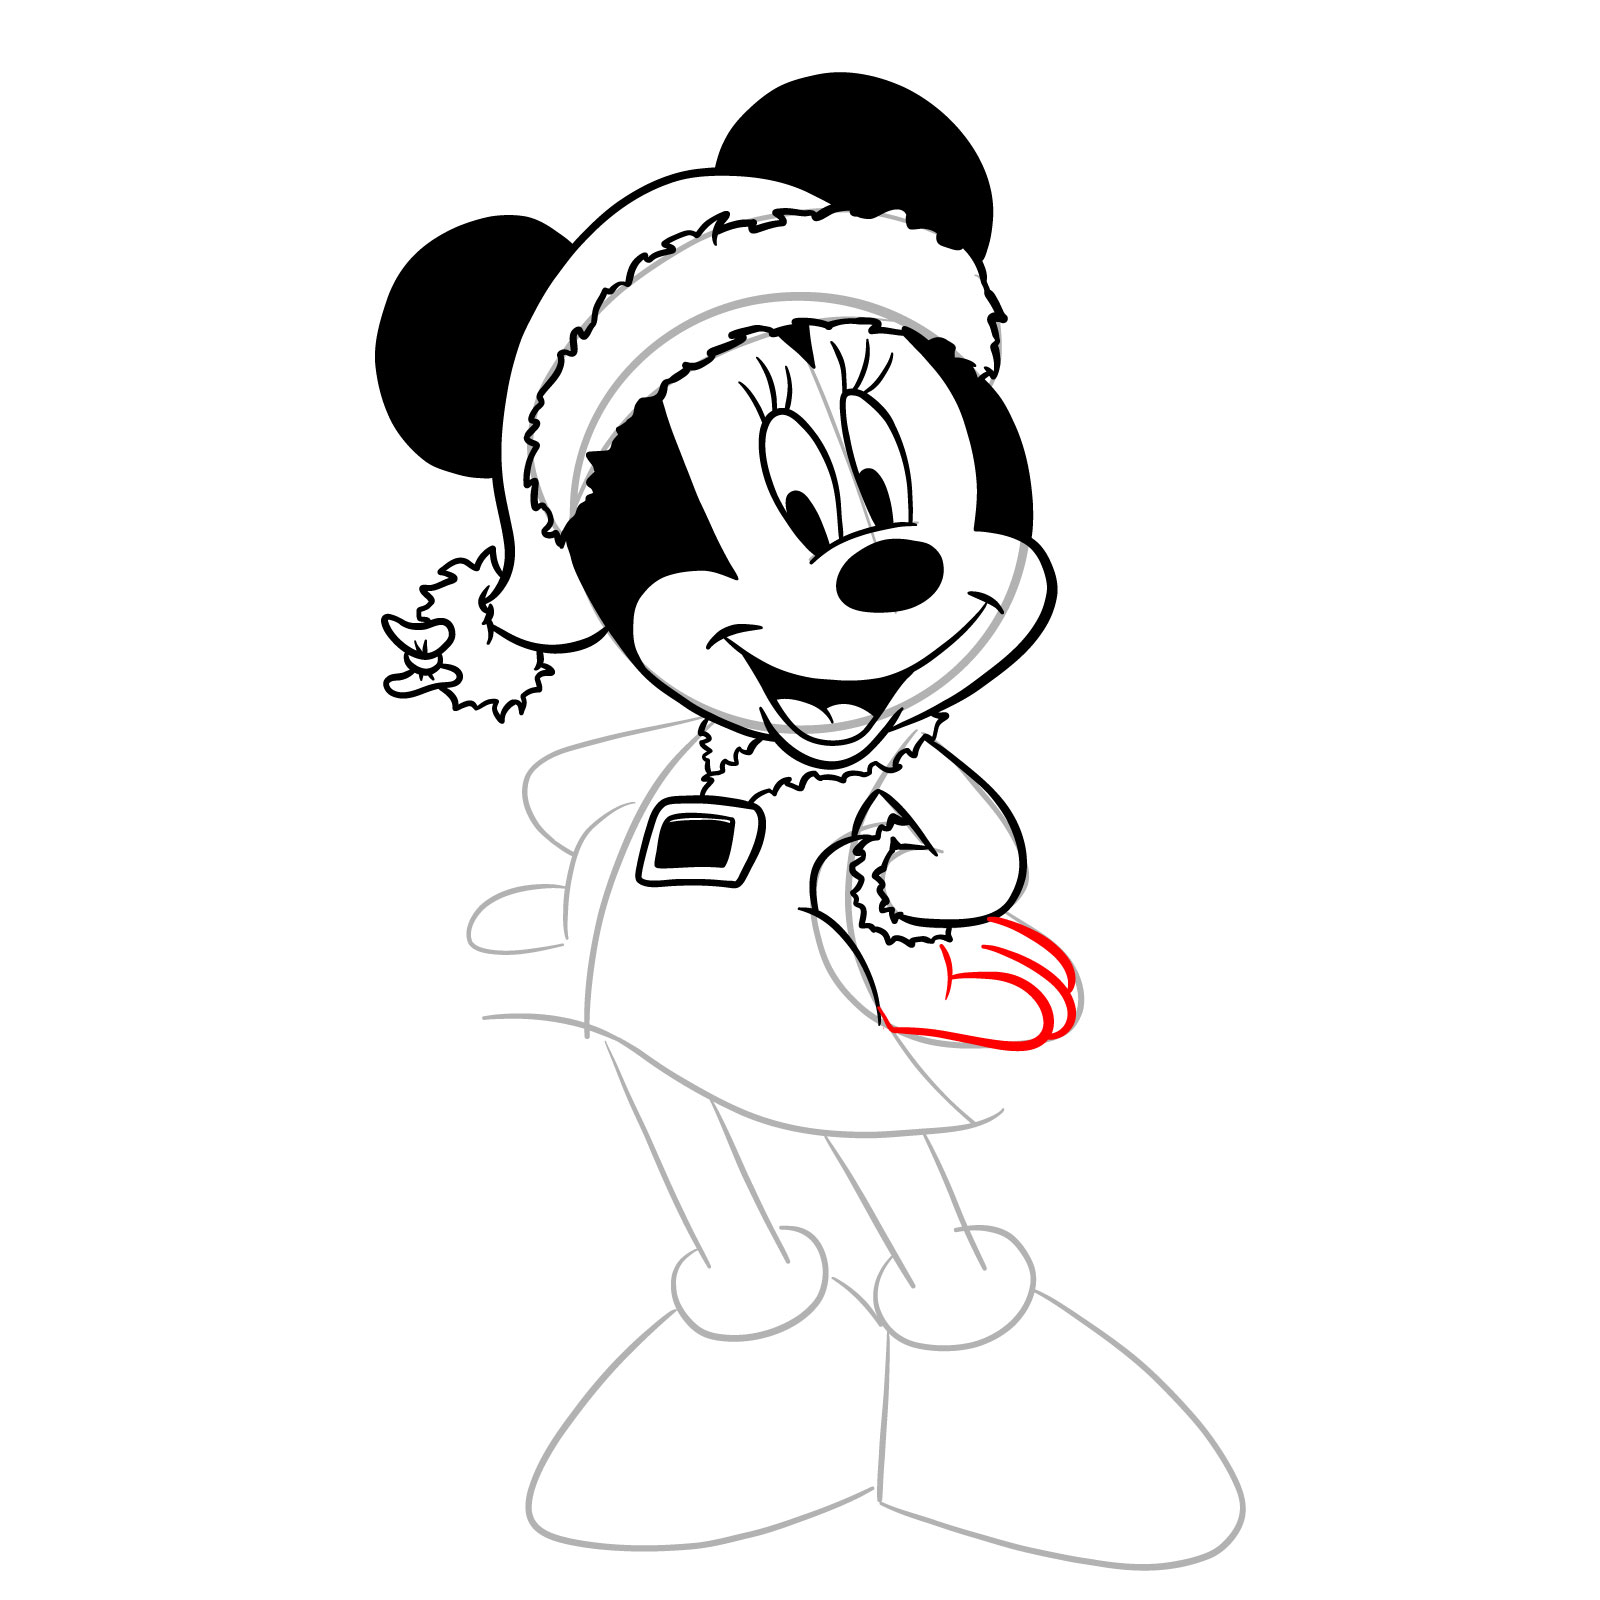 How to draw Minnie in a Christmas dress - step 23